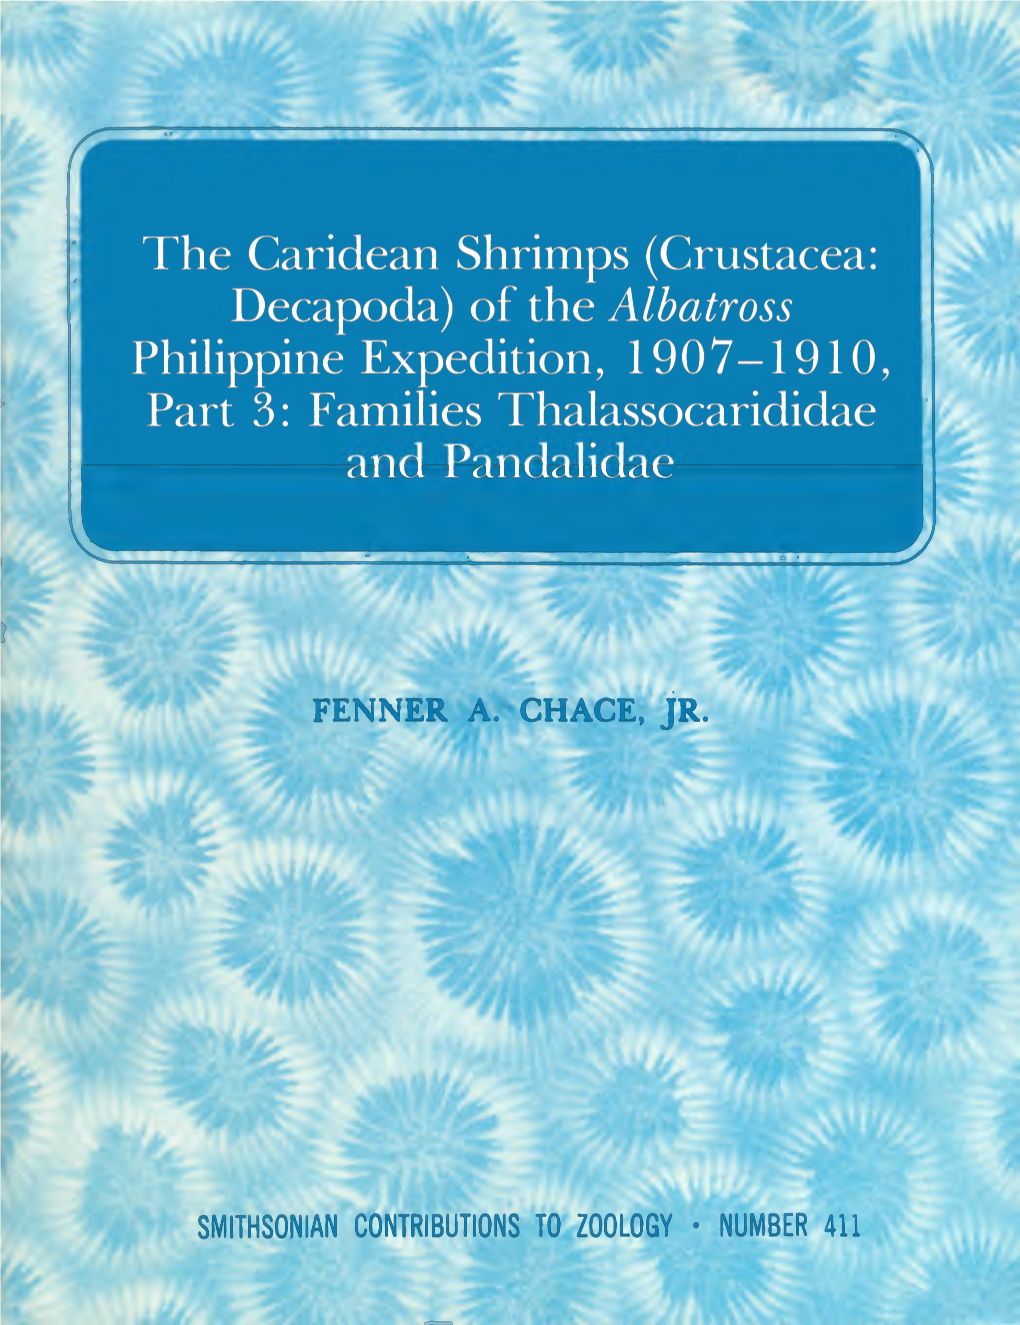 Crustacea: Decapoda) of the Albatross Philippine Expedition, 1907-1910, Part 3: Families Thalassocarididae and Pandalidae